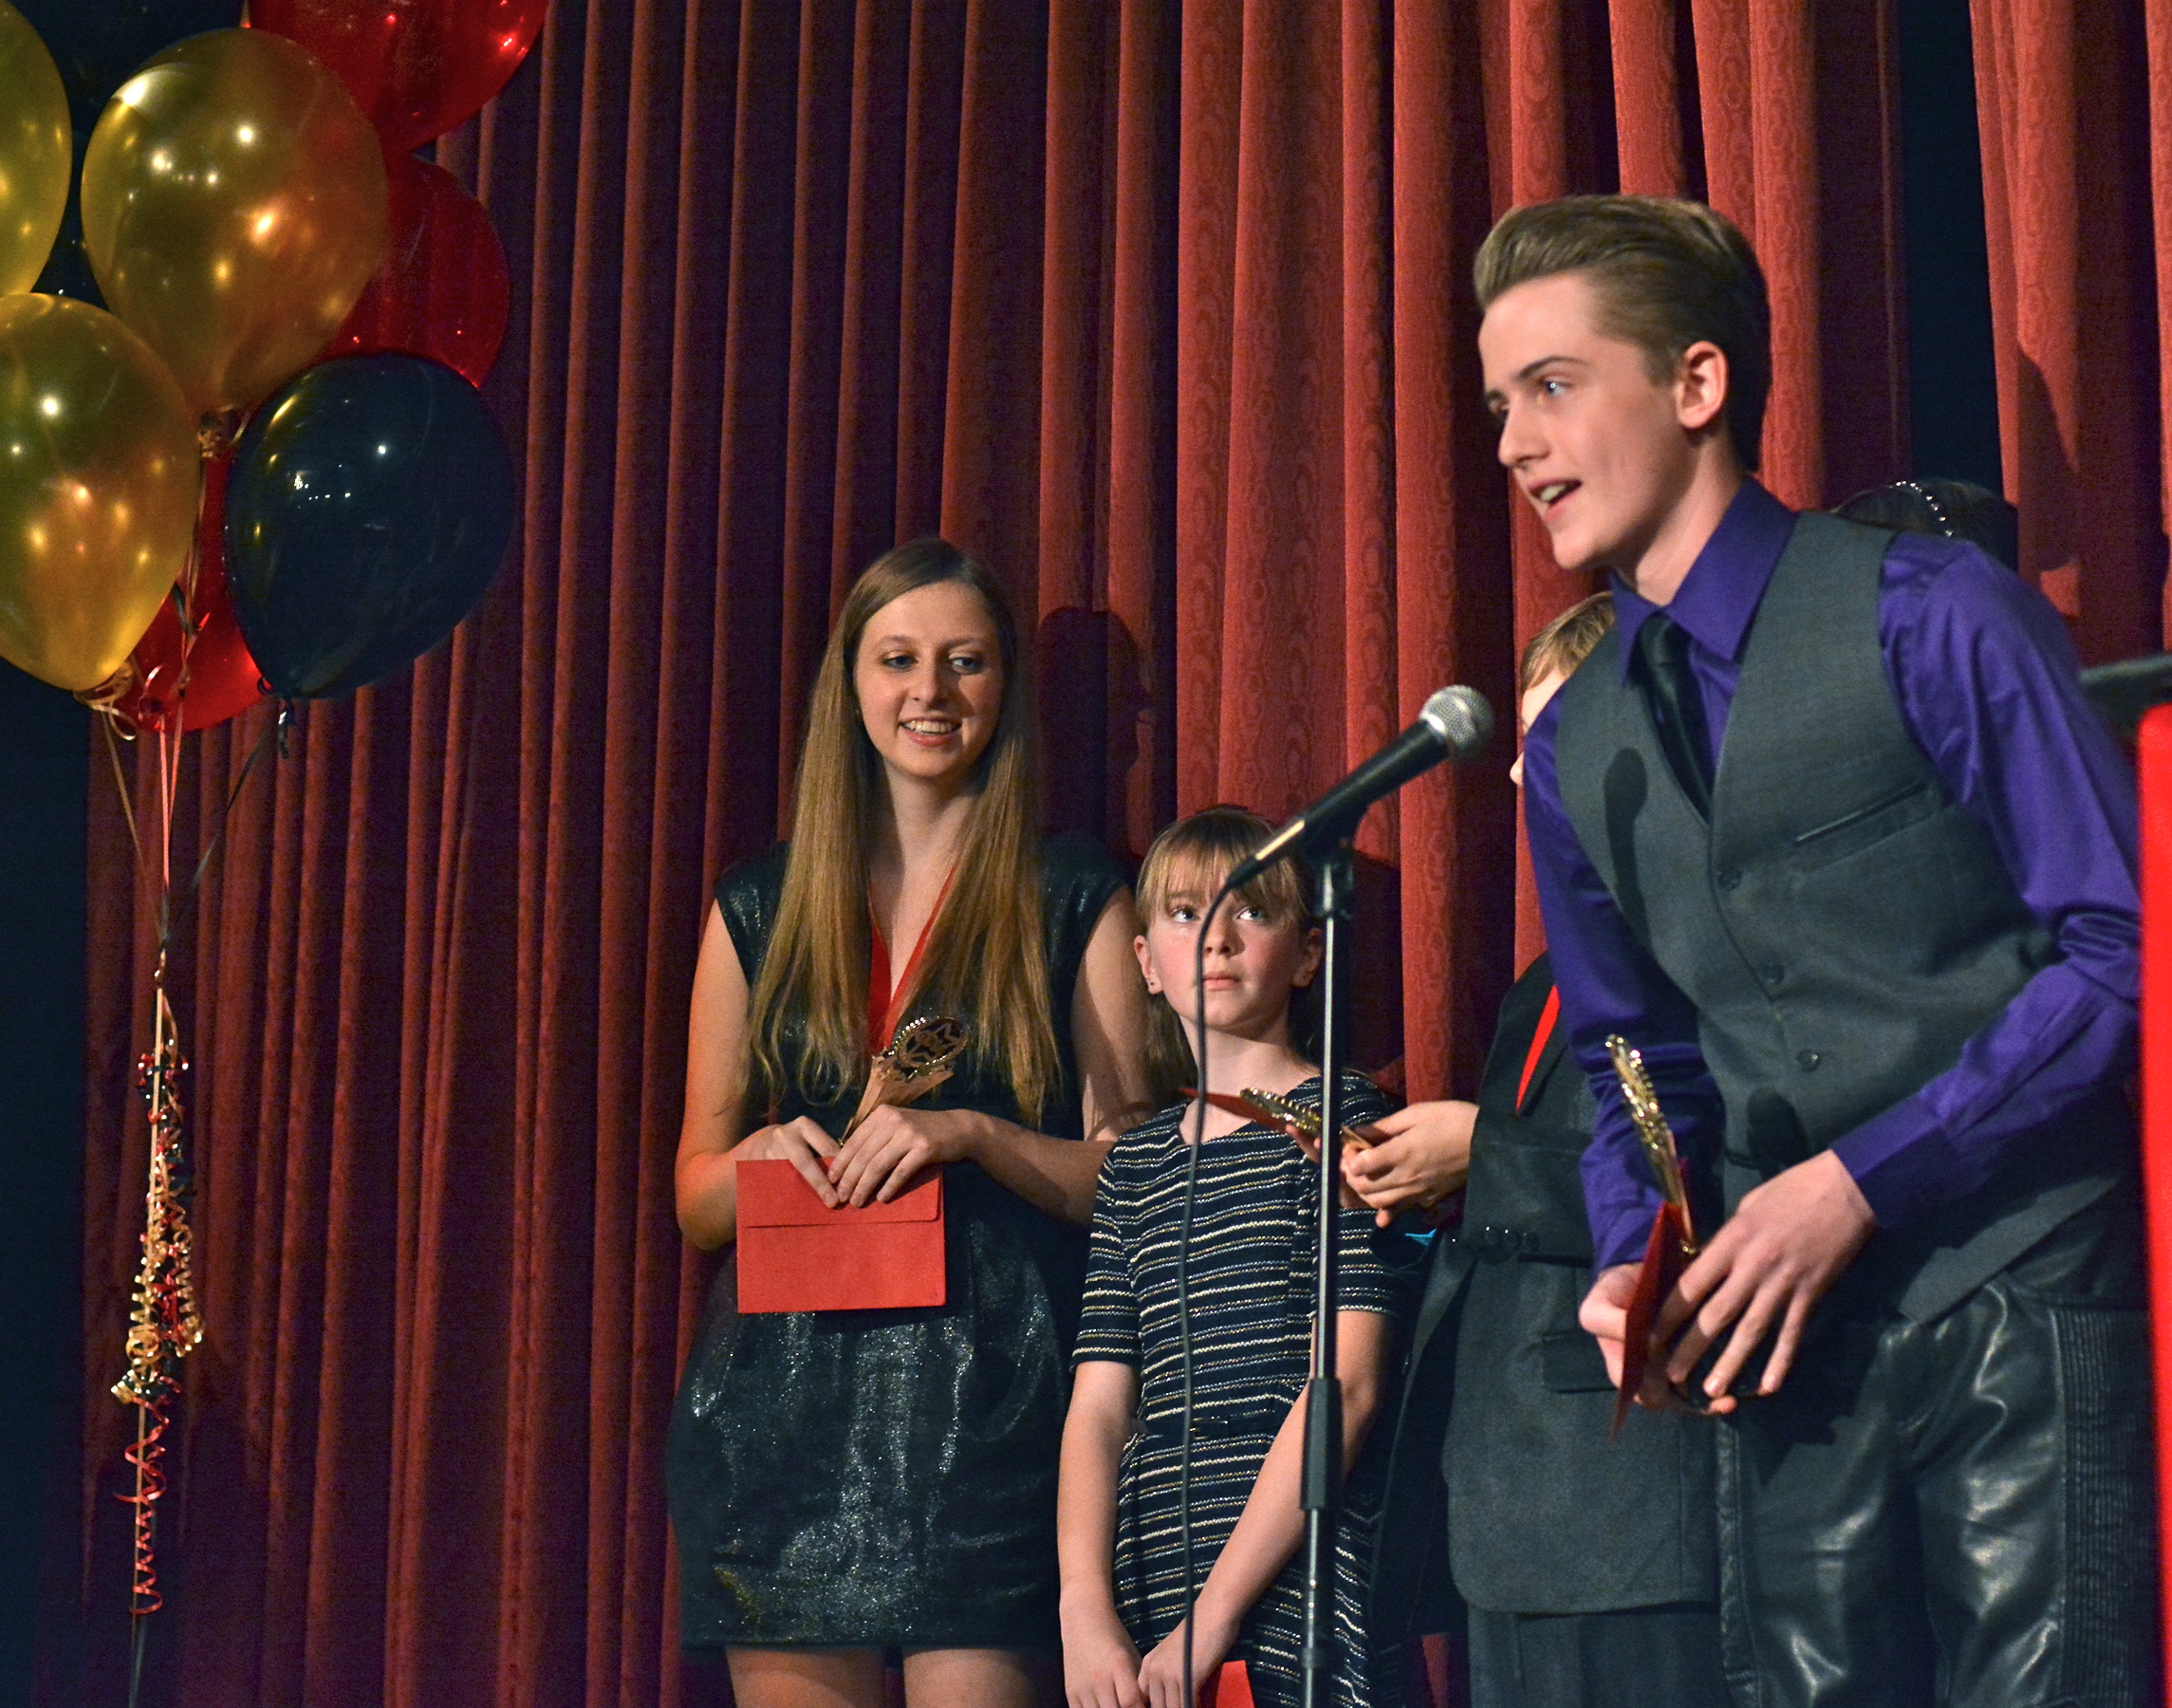 Jadon giving his acceptance speech at the 2014 Joey Awards in Vancouver